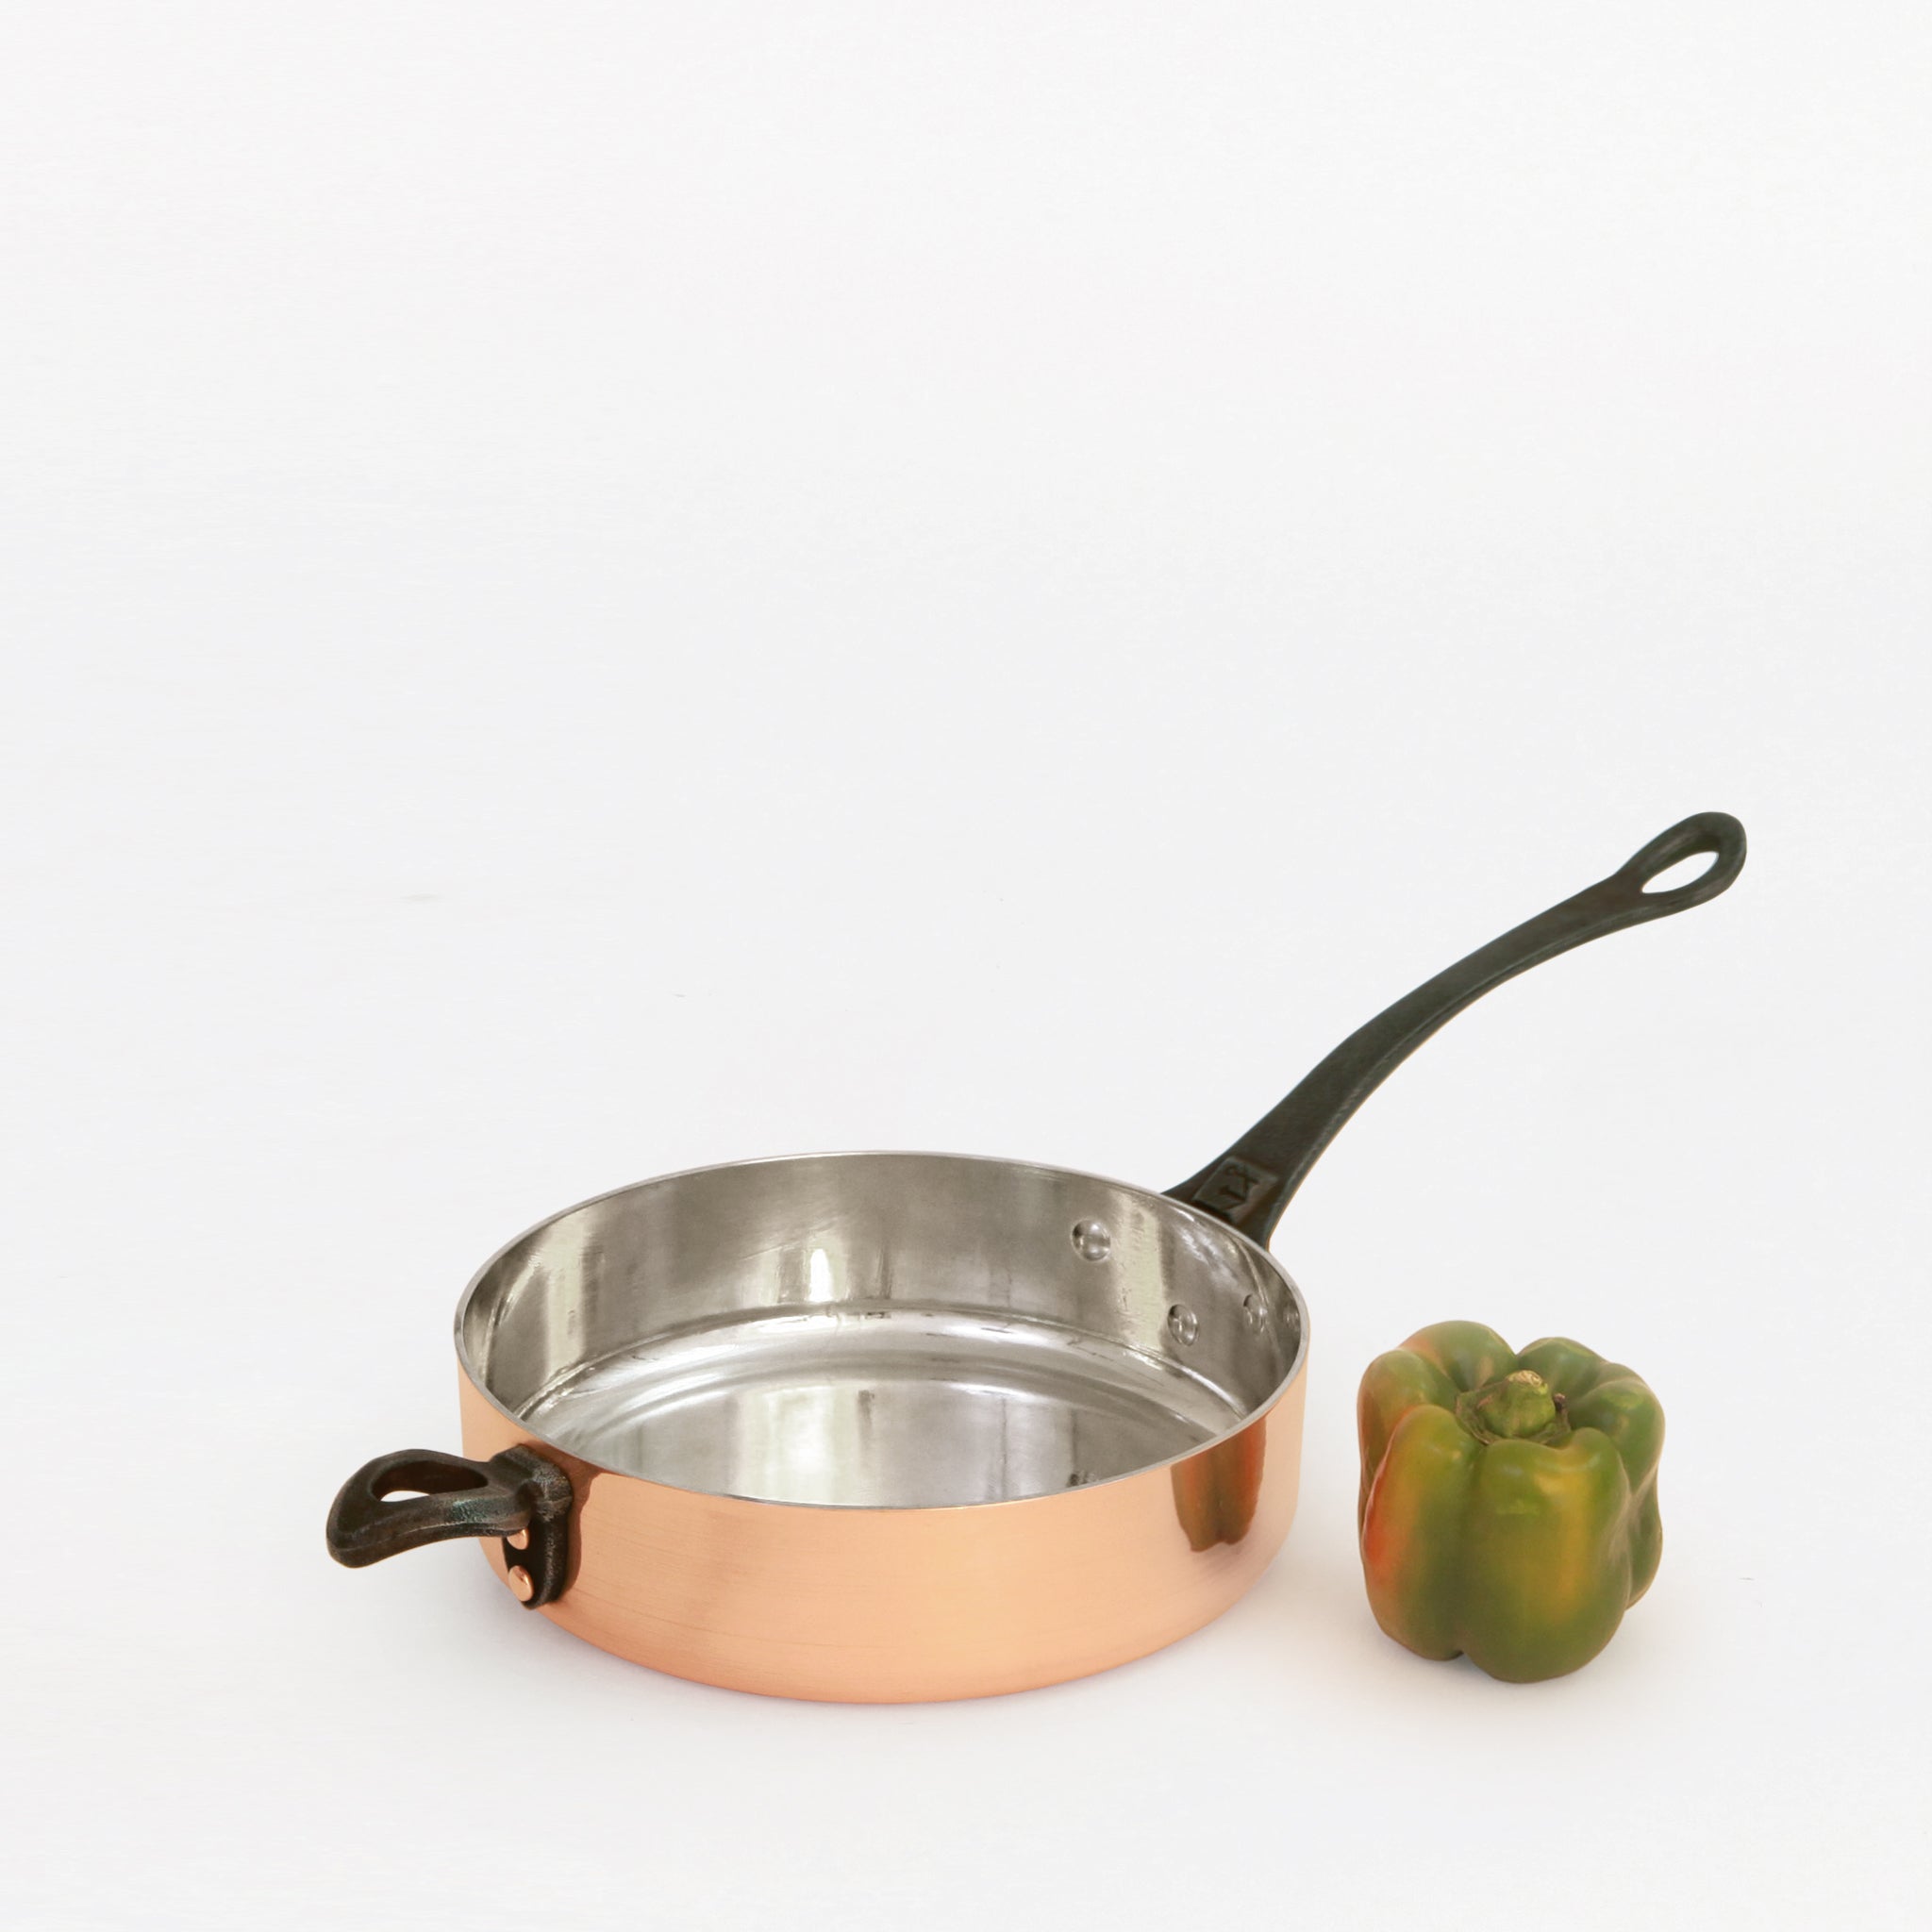 Mirror Polished Copper Band Saute Pan with Lid 9.5 inch Nickel Free Non-Stick